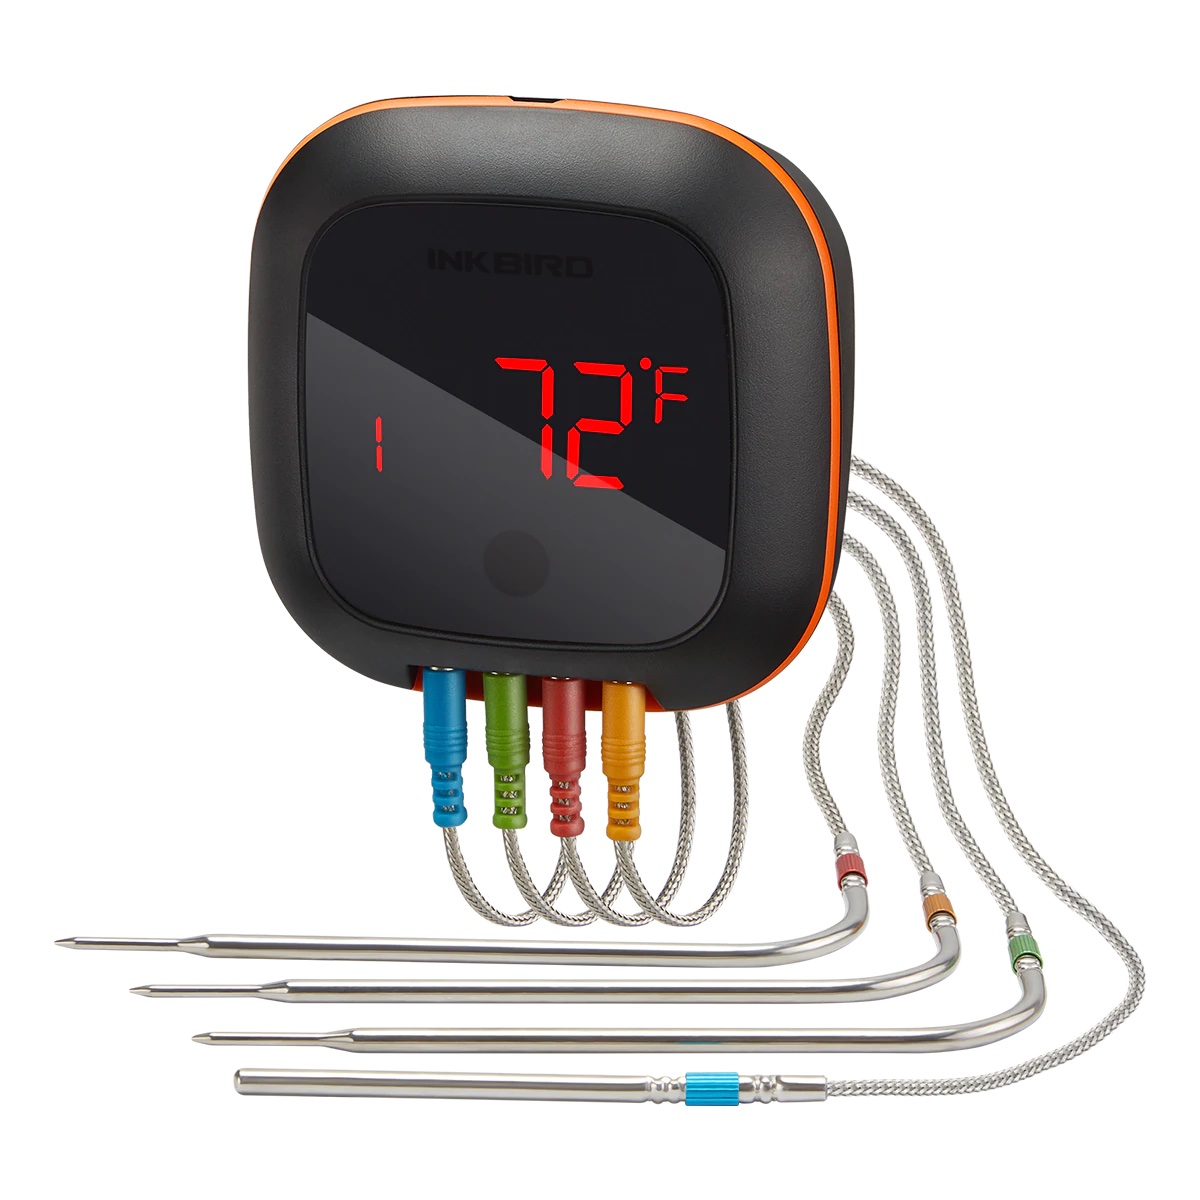 Cook with confidence with the Riida Wireless Meat Thermometer for